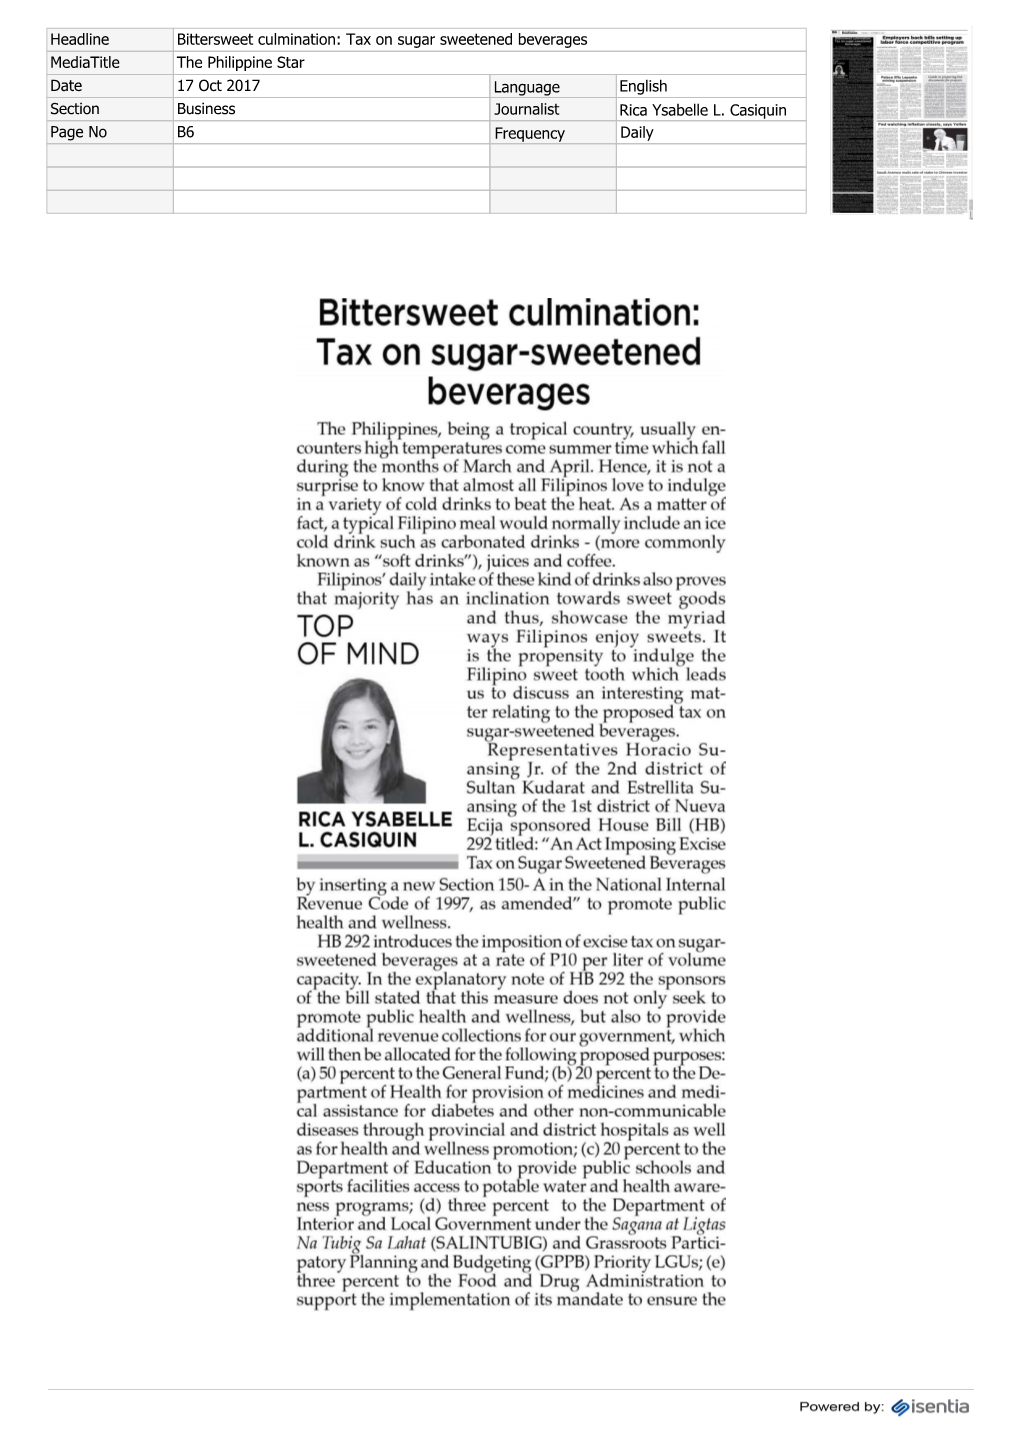 Beverages Mediatitle the Philippine Star Date 17 Oct 2017 Language English Section Business Journalist Rica Ysabelle L